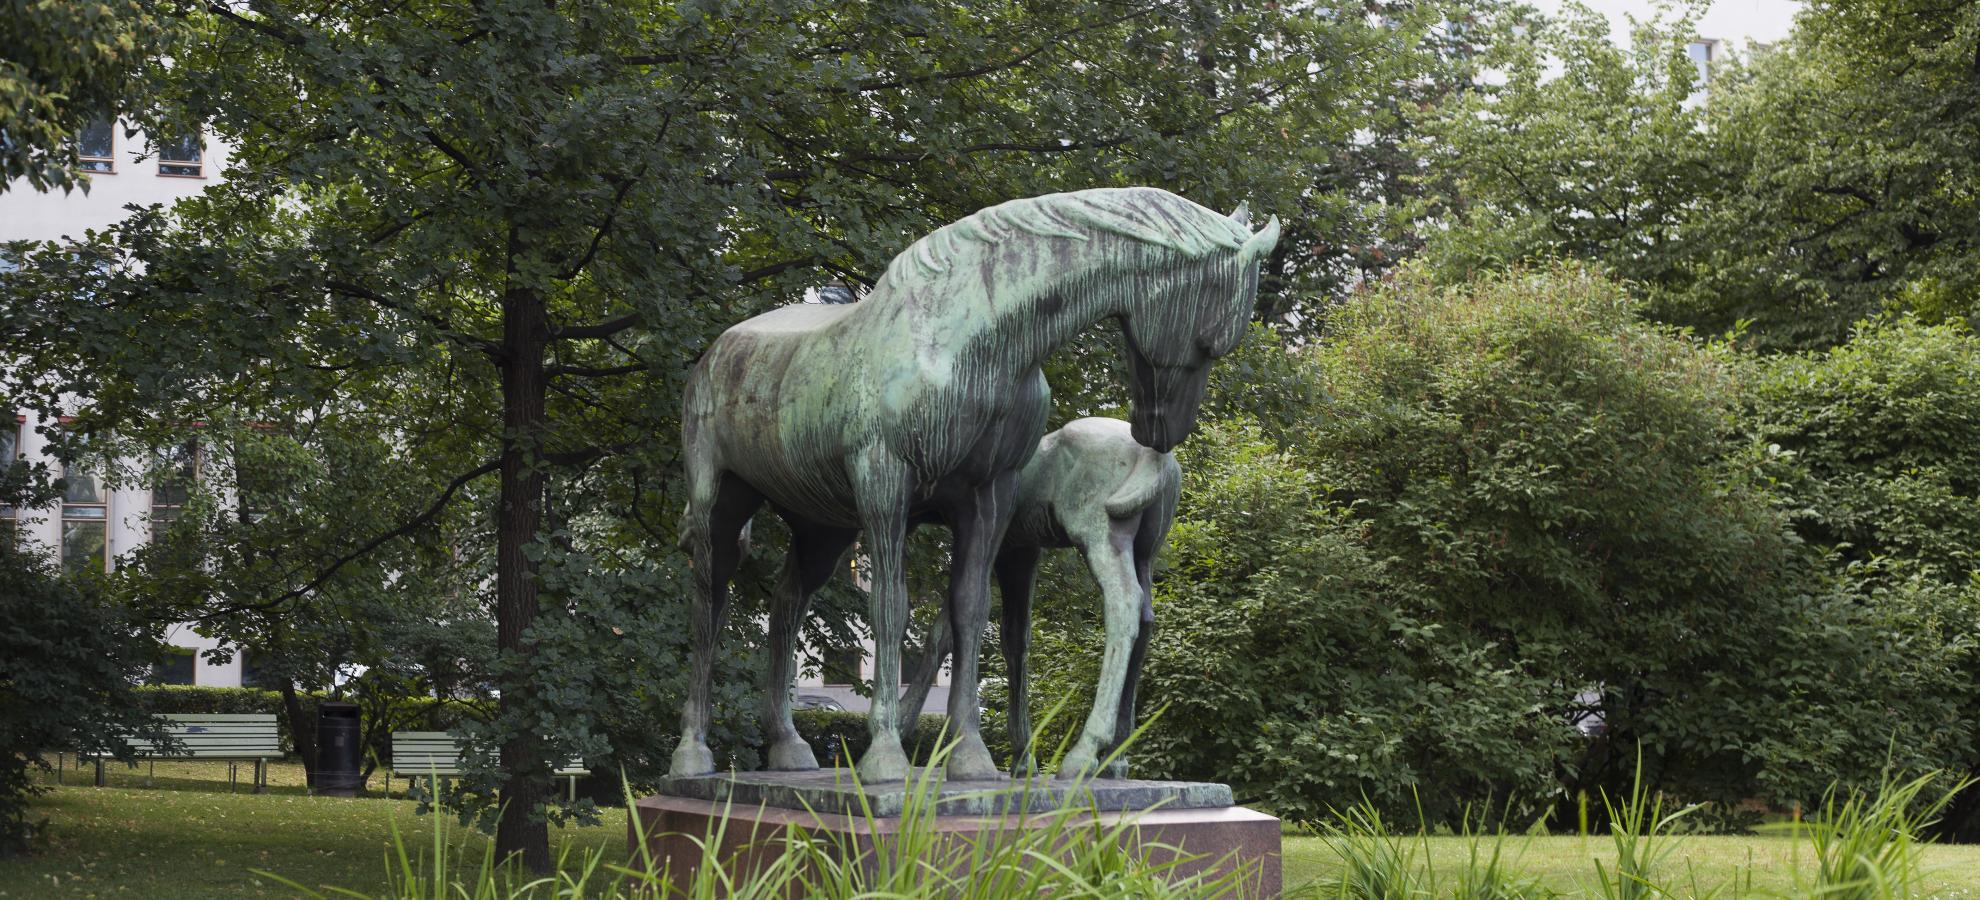 Emil Cedercreutz's Äidinrakkaus / Maternal Love statue, 1928, depicting a mother horse with its foal, surrounded by the trees of the park.